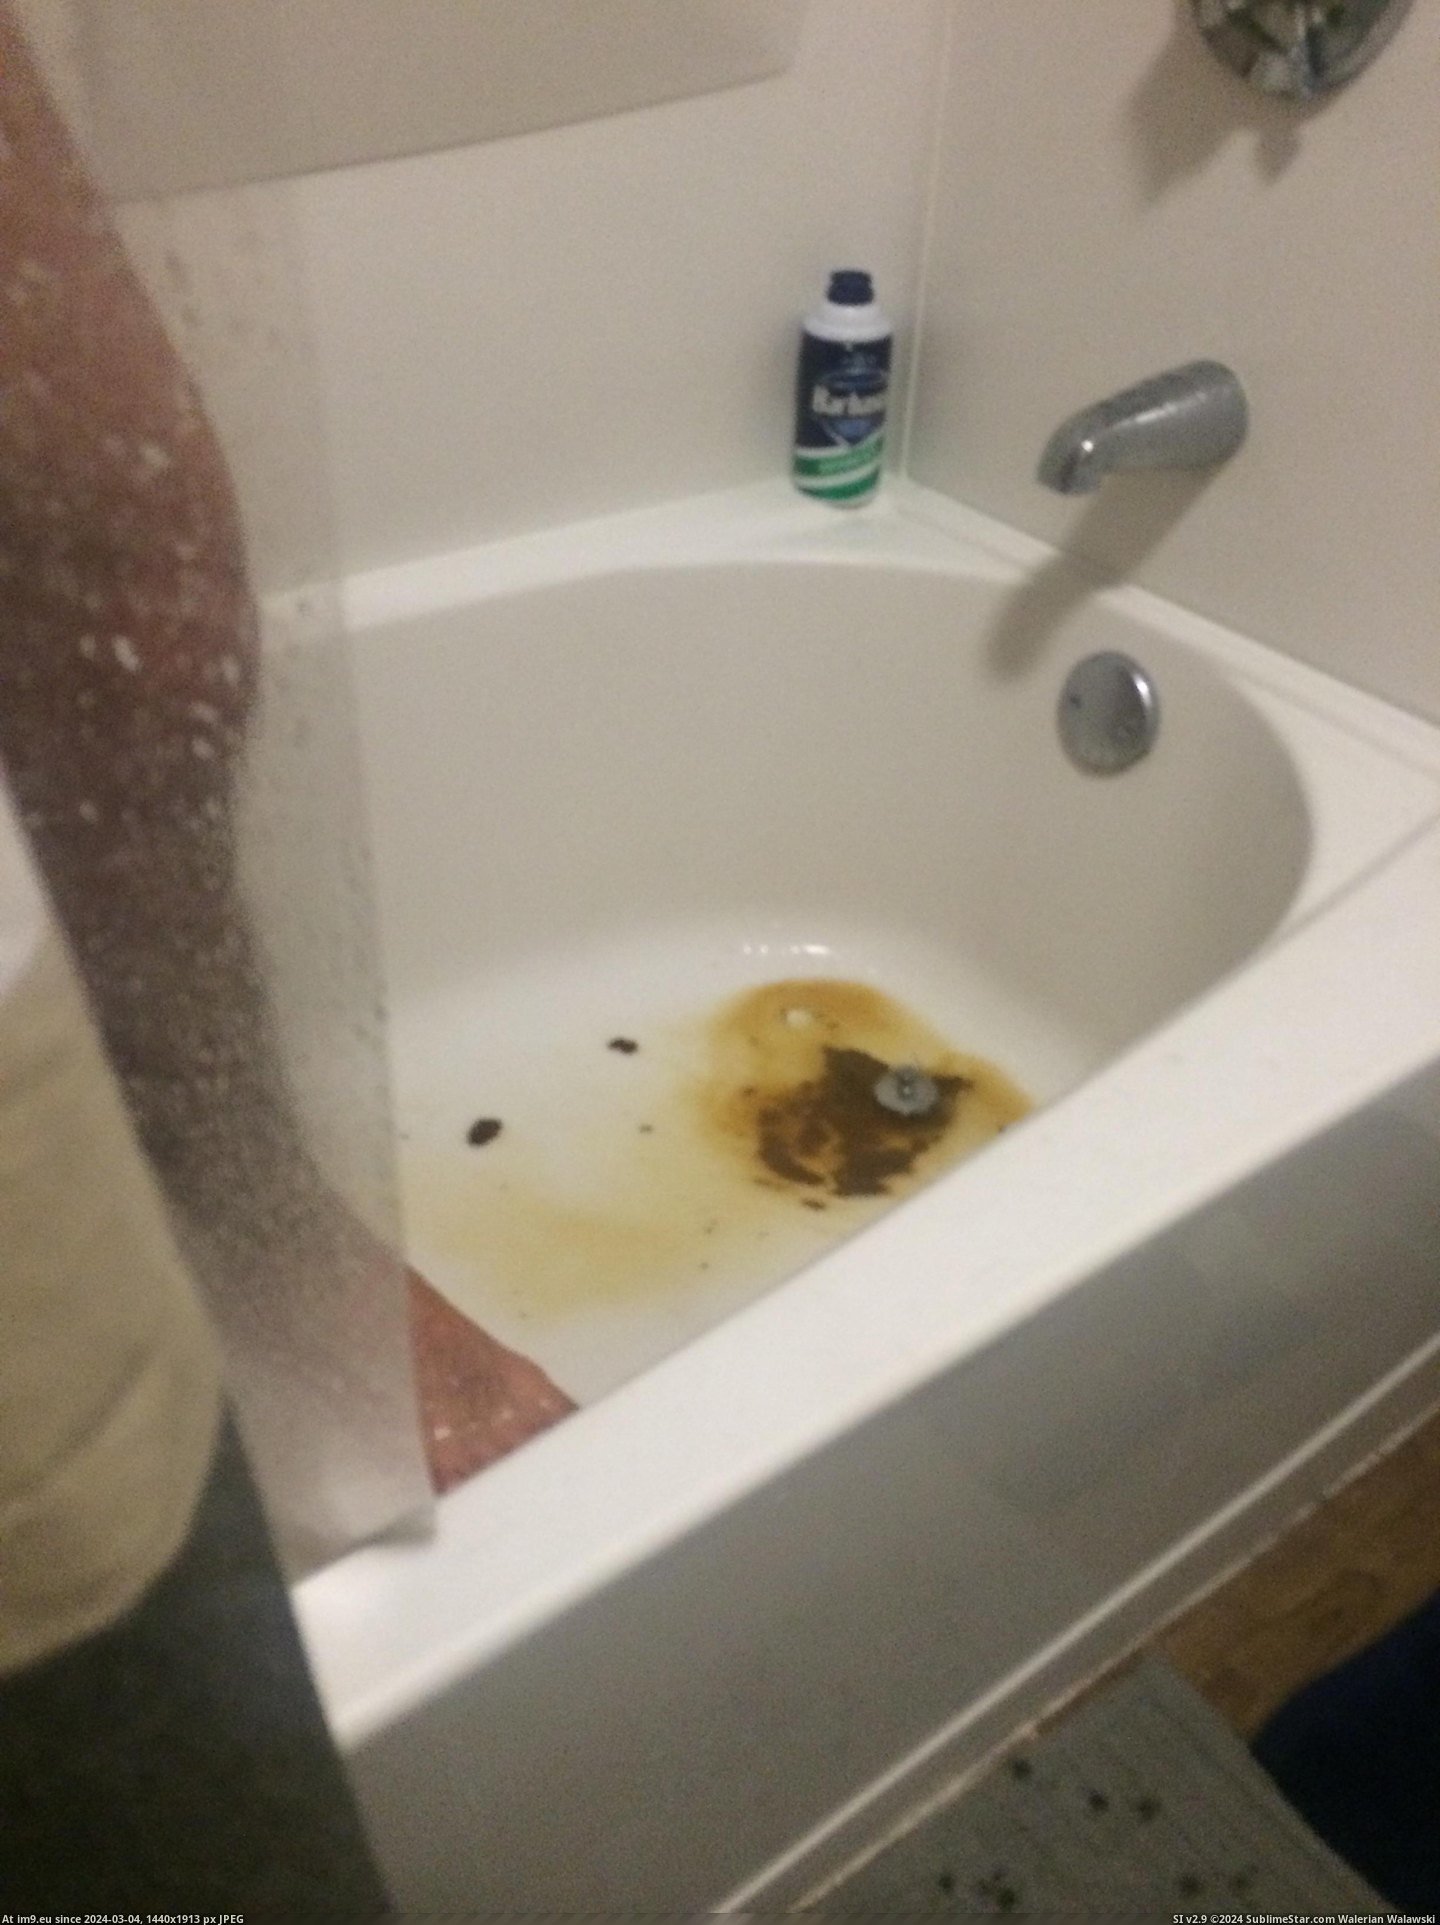 #Wtf #Shower #Shit #Sober #Roomate #Drain #Pushed #Purpose [Wtf] Roomate took a shit in the shower and pushed it down the drain. On purpose. Sober. Pic. (Image of album My r/WTF favs))